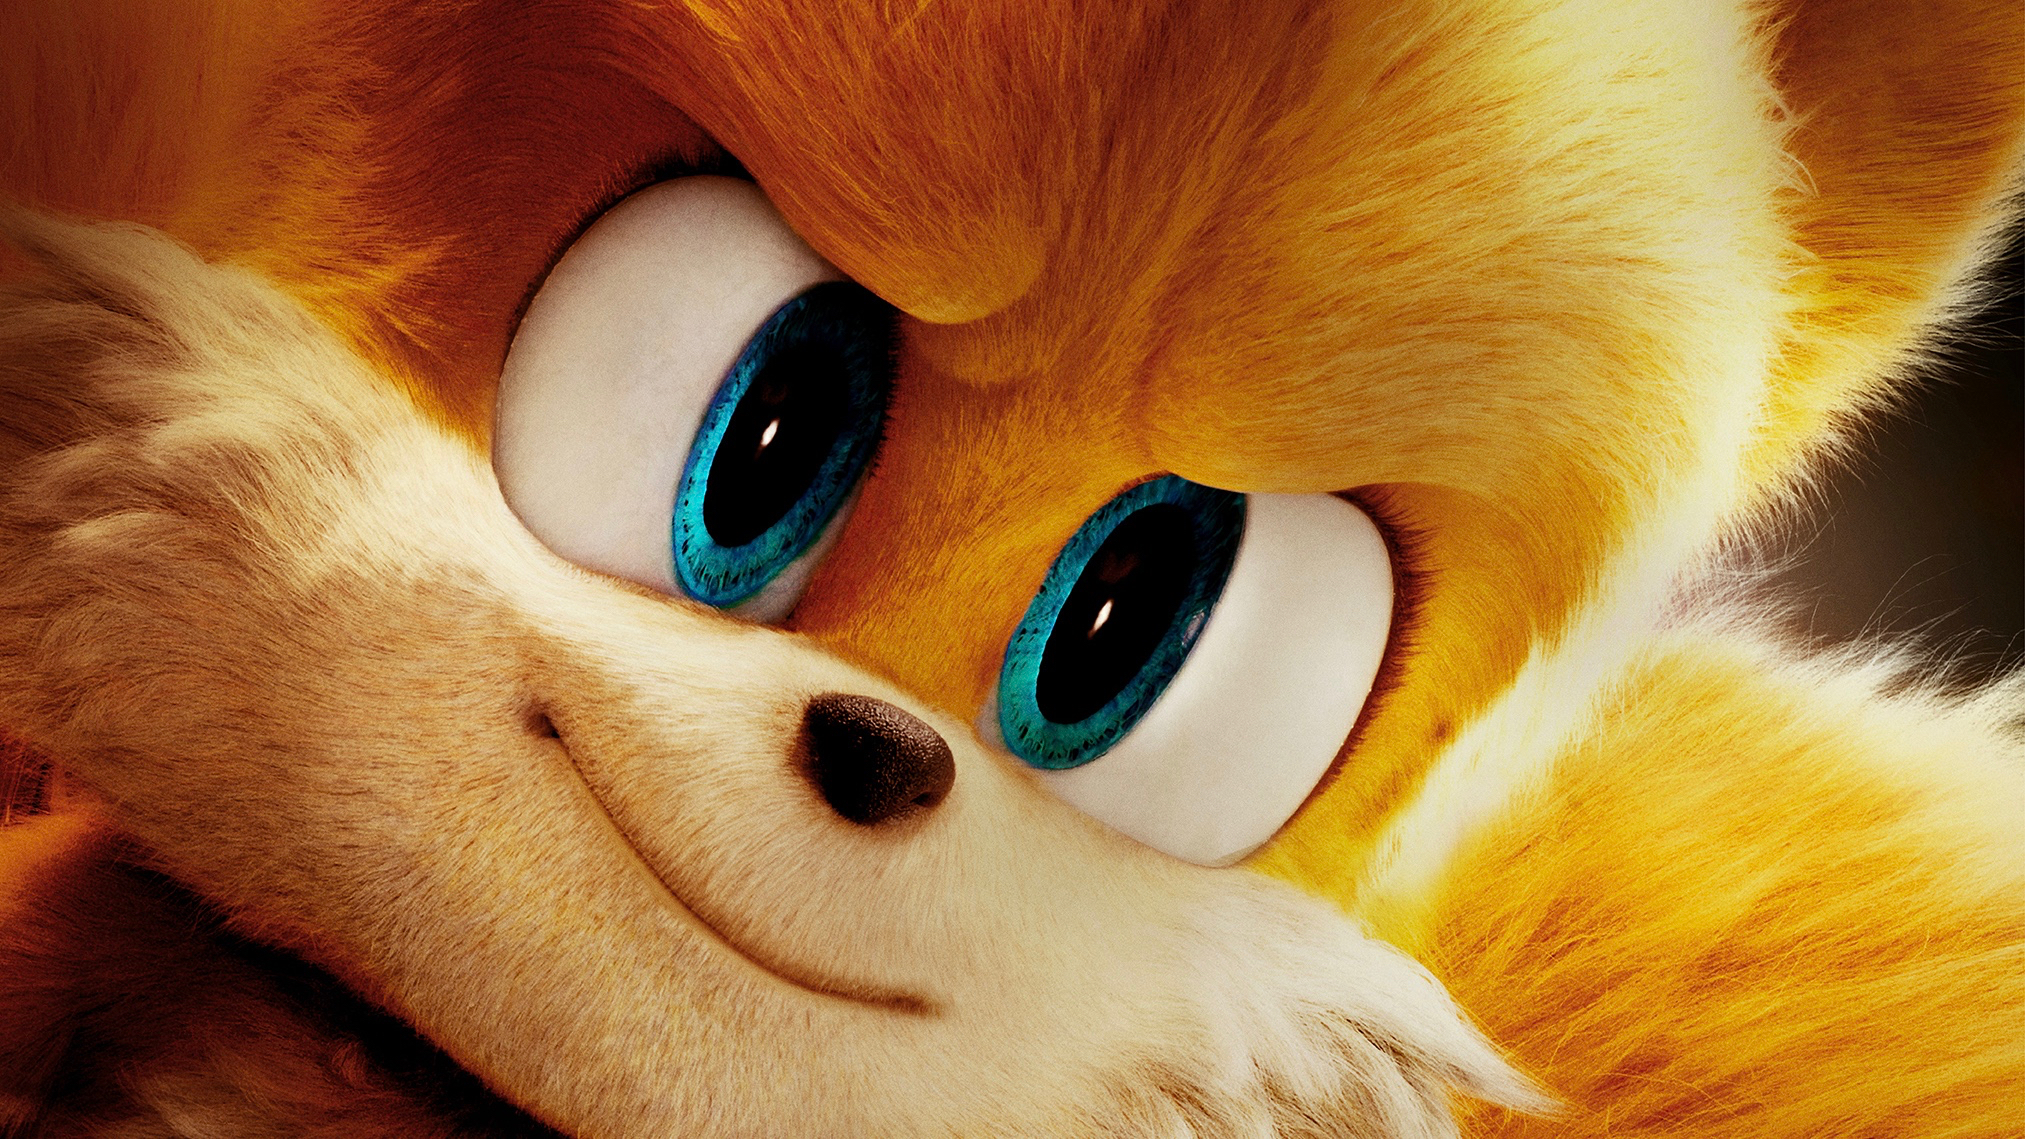 movie, sonic the hedgehog 2, miles 'tails' prower, sonic